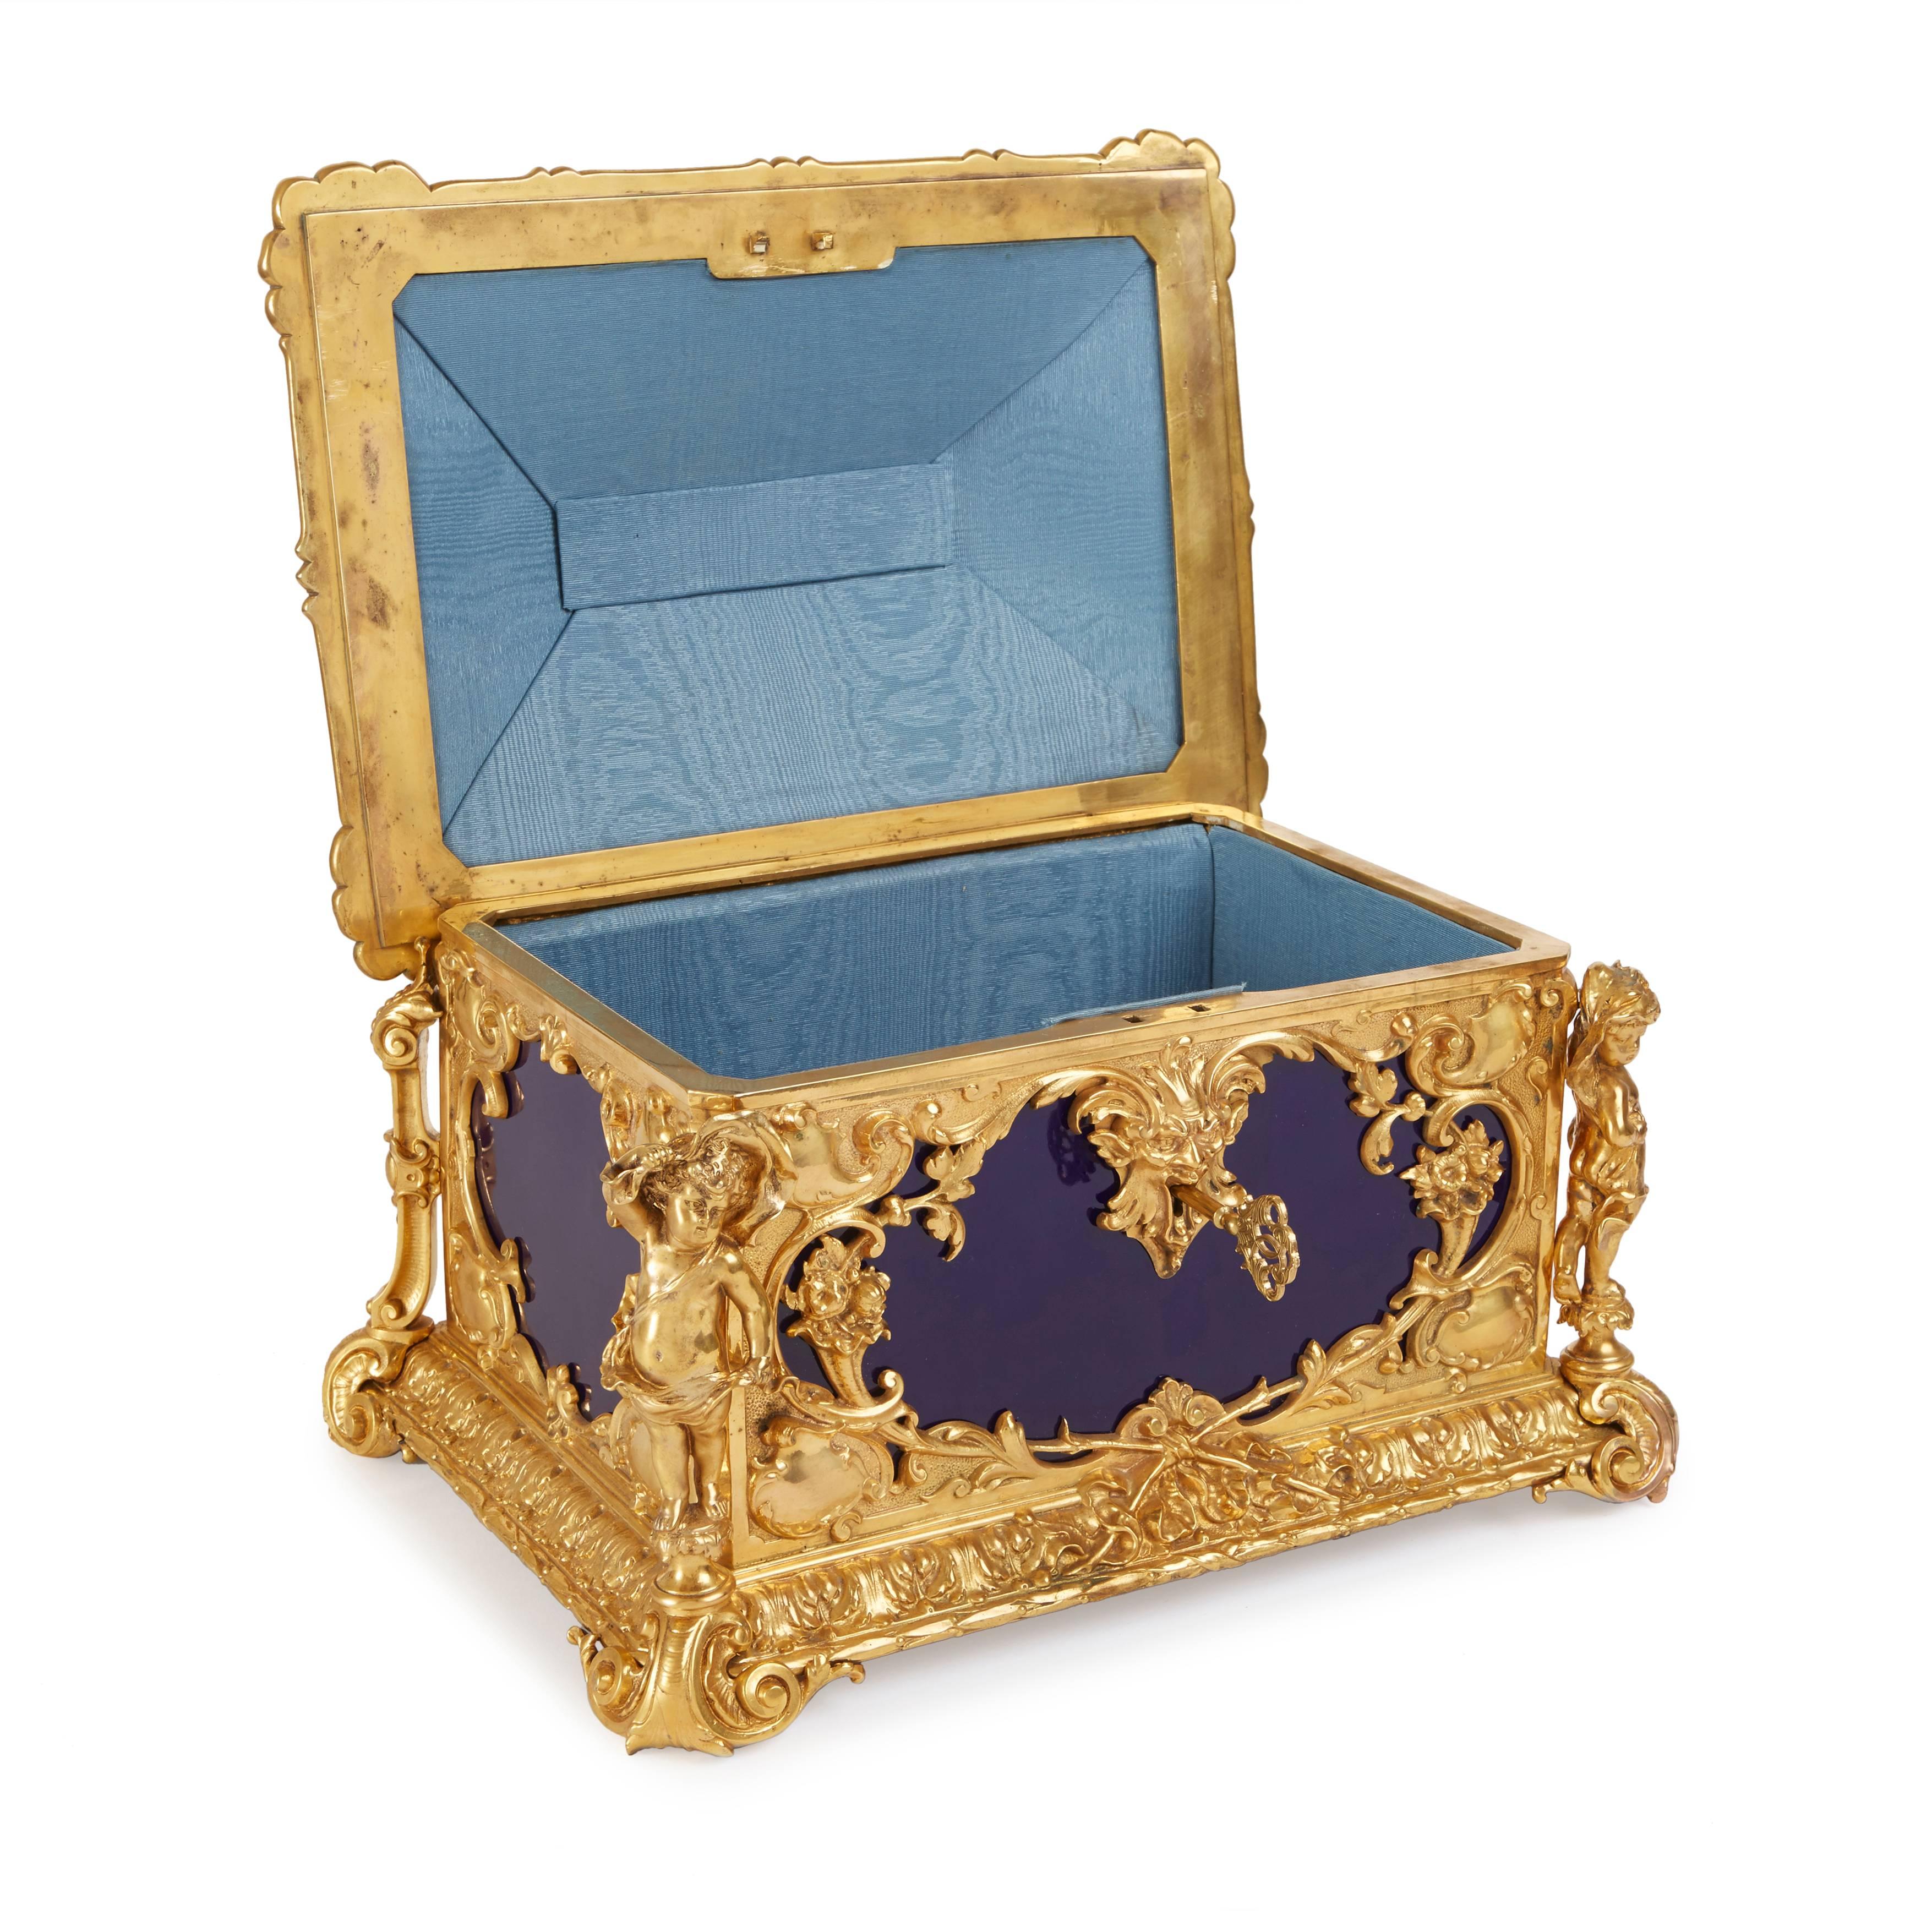 Of rectangular form, the cobalt-blue ground porcelain plaques mounted with rich ormolu corner mounts with scrolls, floral bouquets and a grotesque mask escutcheon, the hinged cover topped with an ormolu cherub handle, on scroll feet, the porcelain